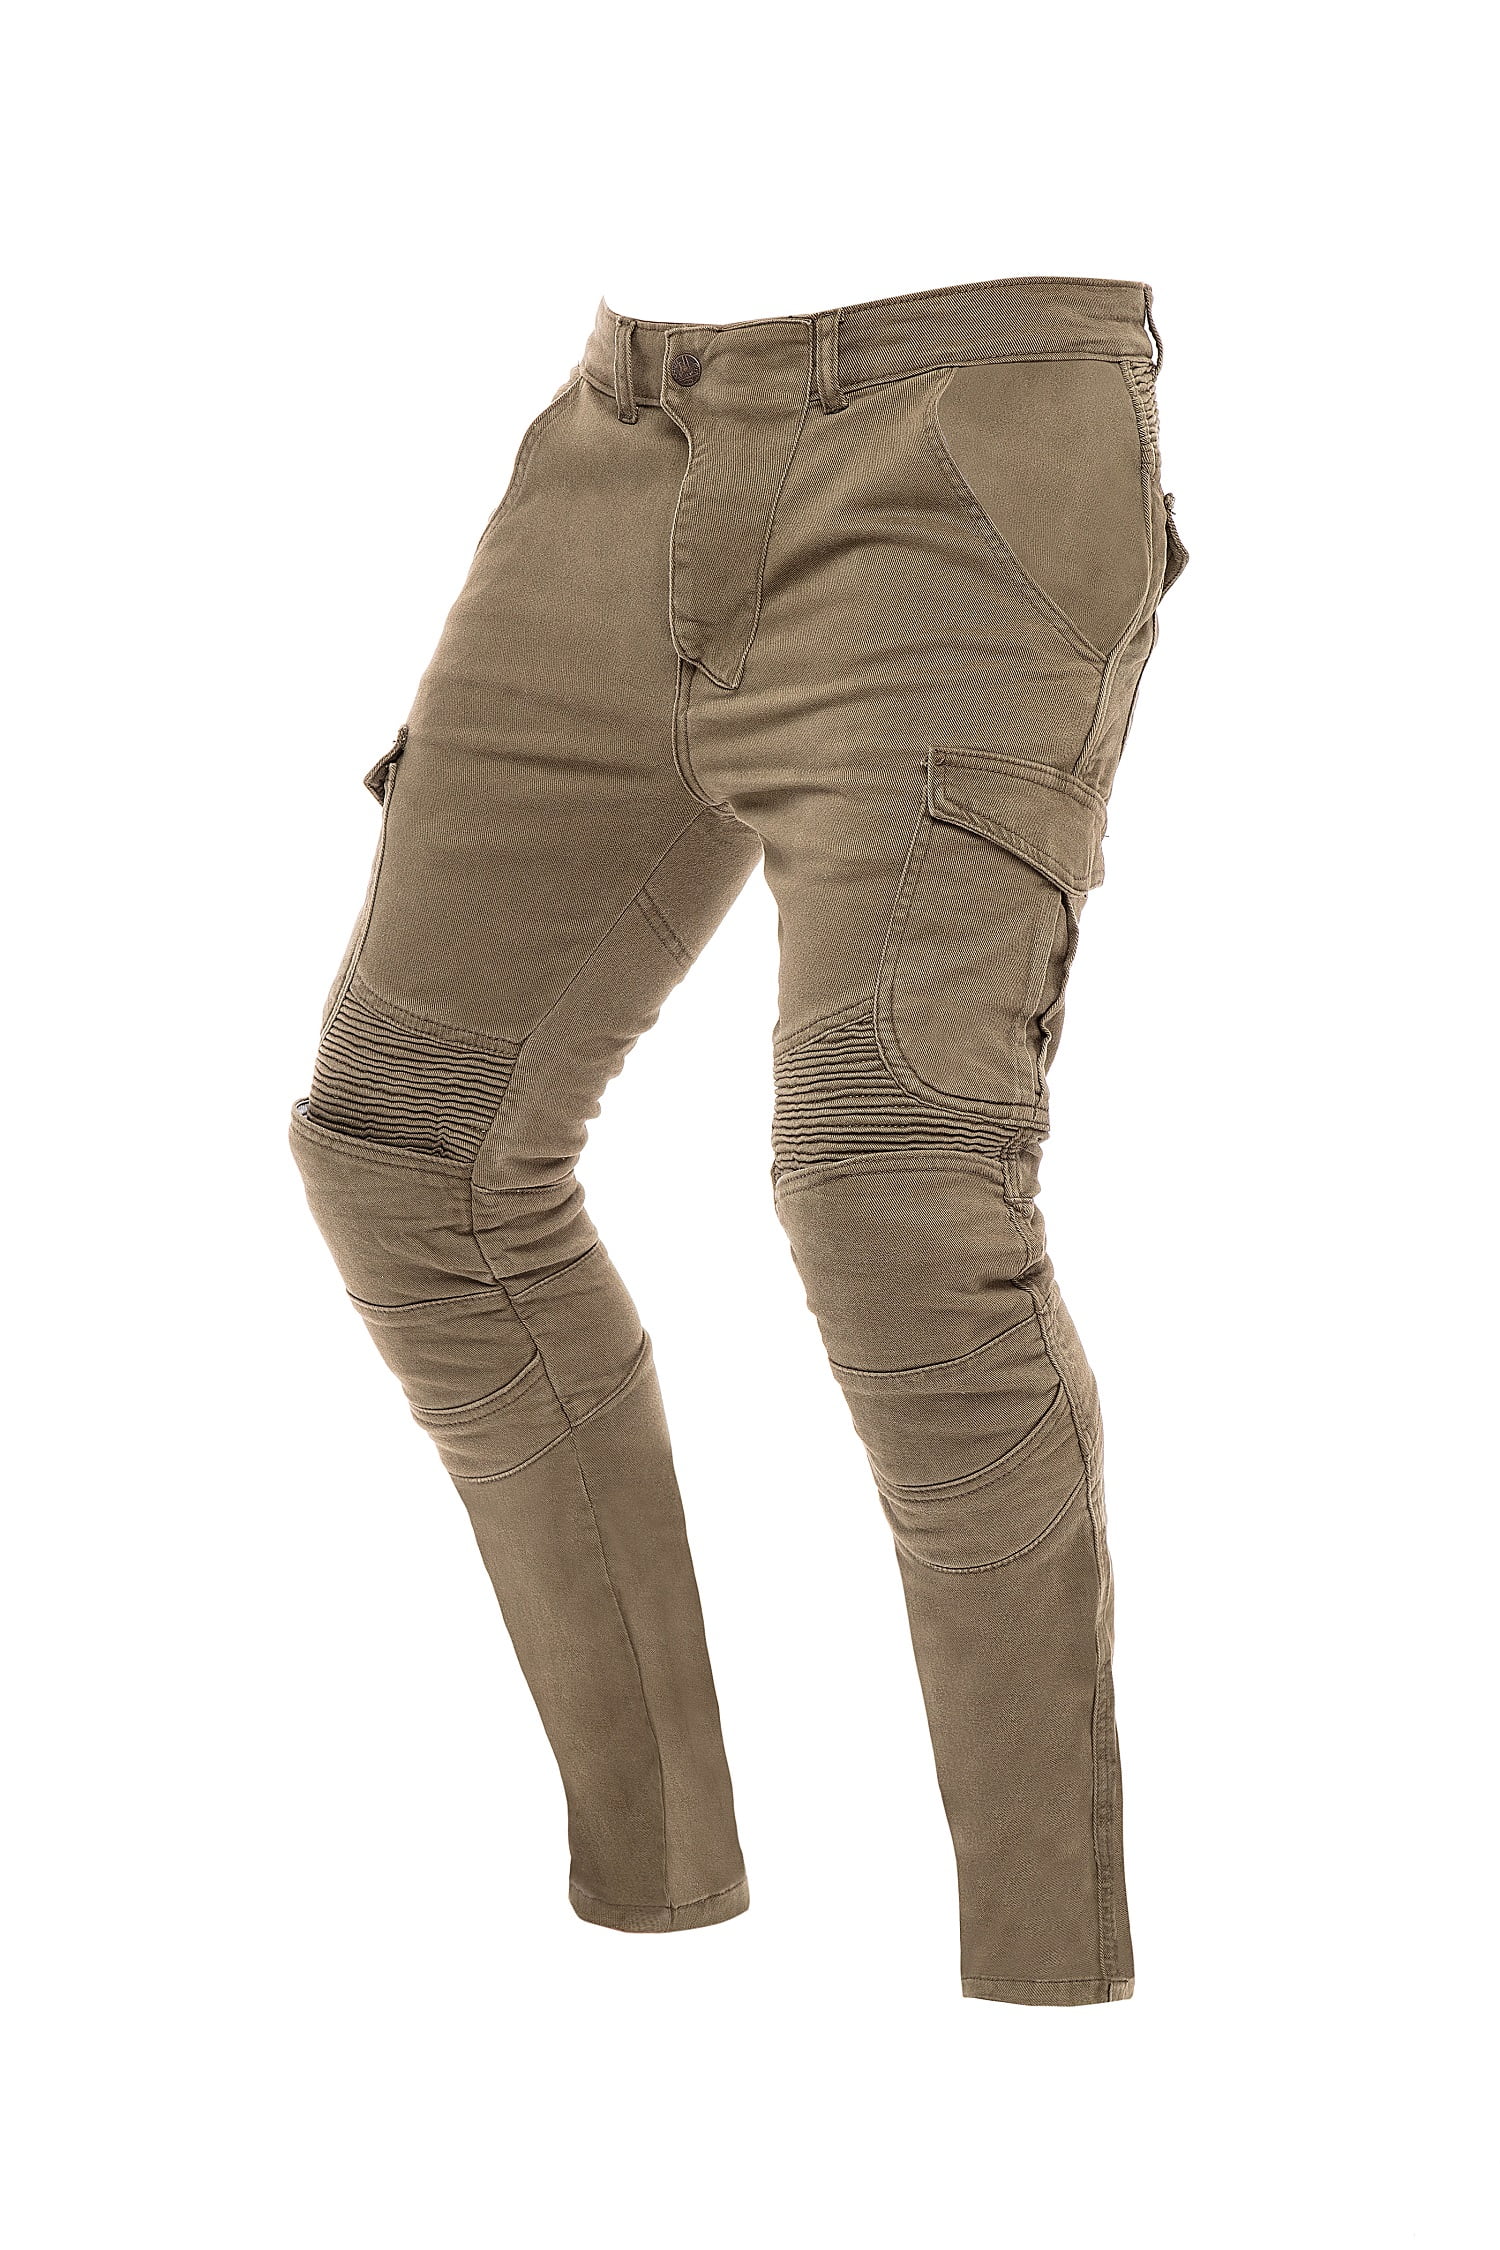 GREY COTTON CAMO CARGO WITH KEVLAR MOTORBIKE MOTORCYCLE TROUSERS MENS BROWN 